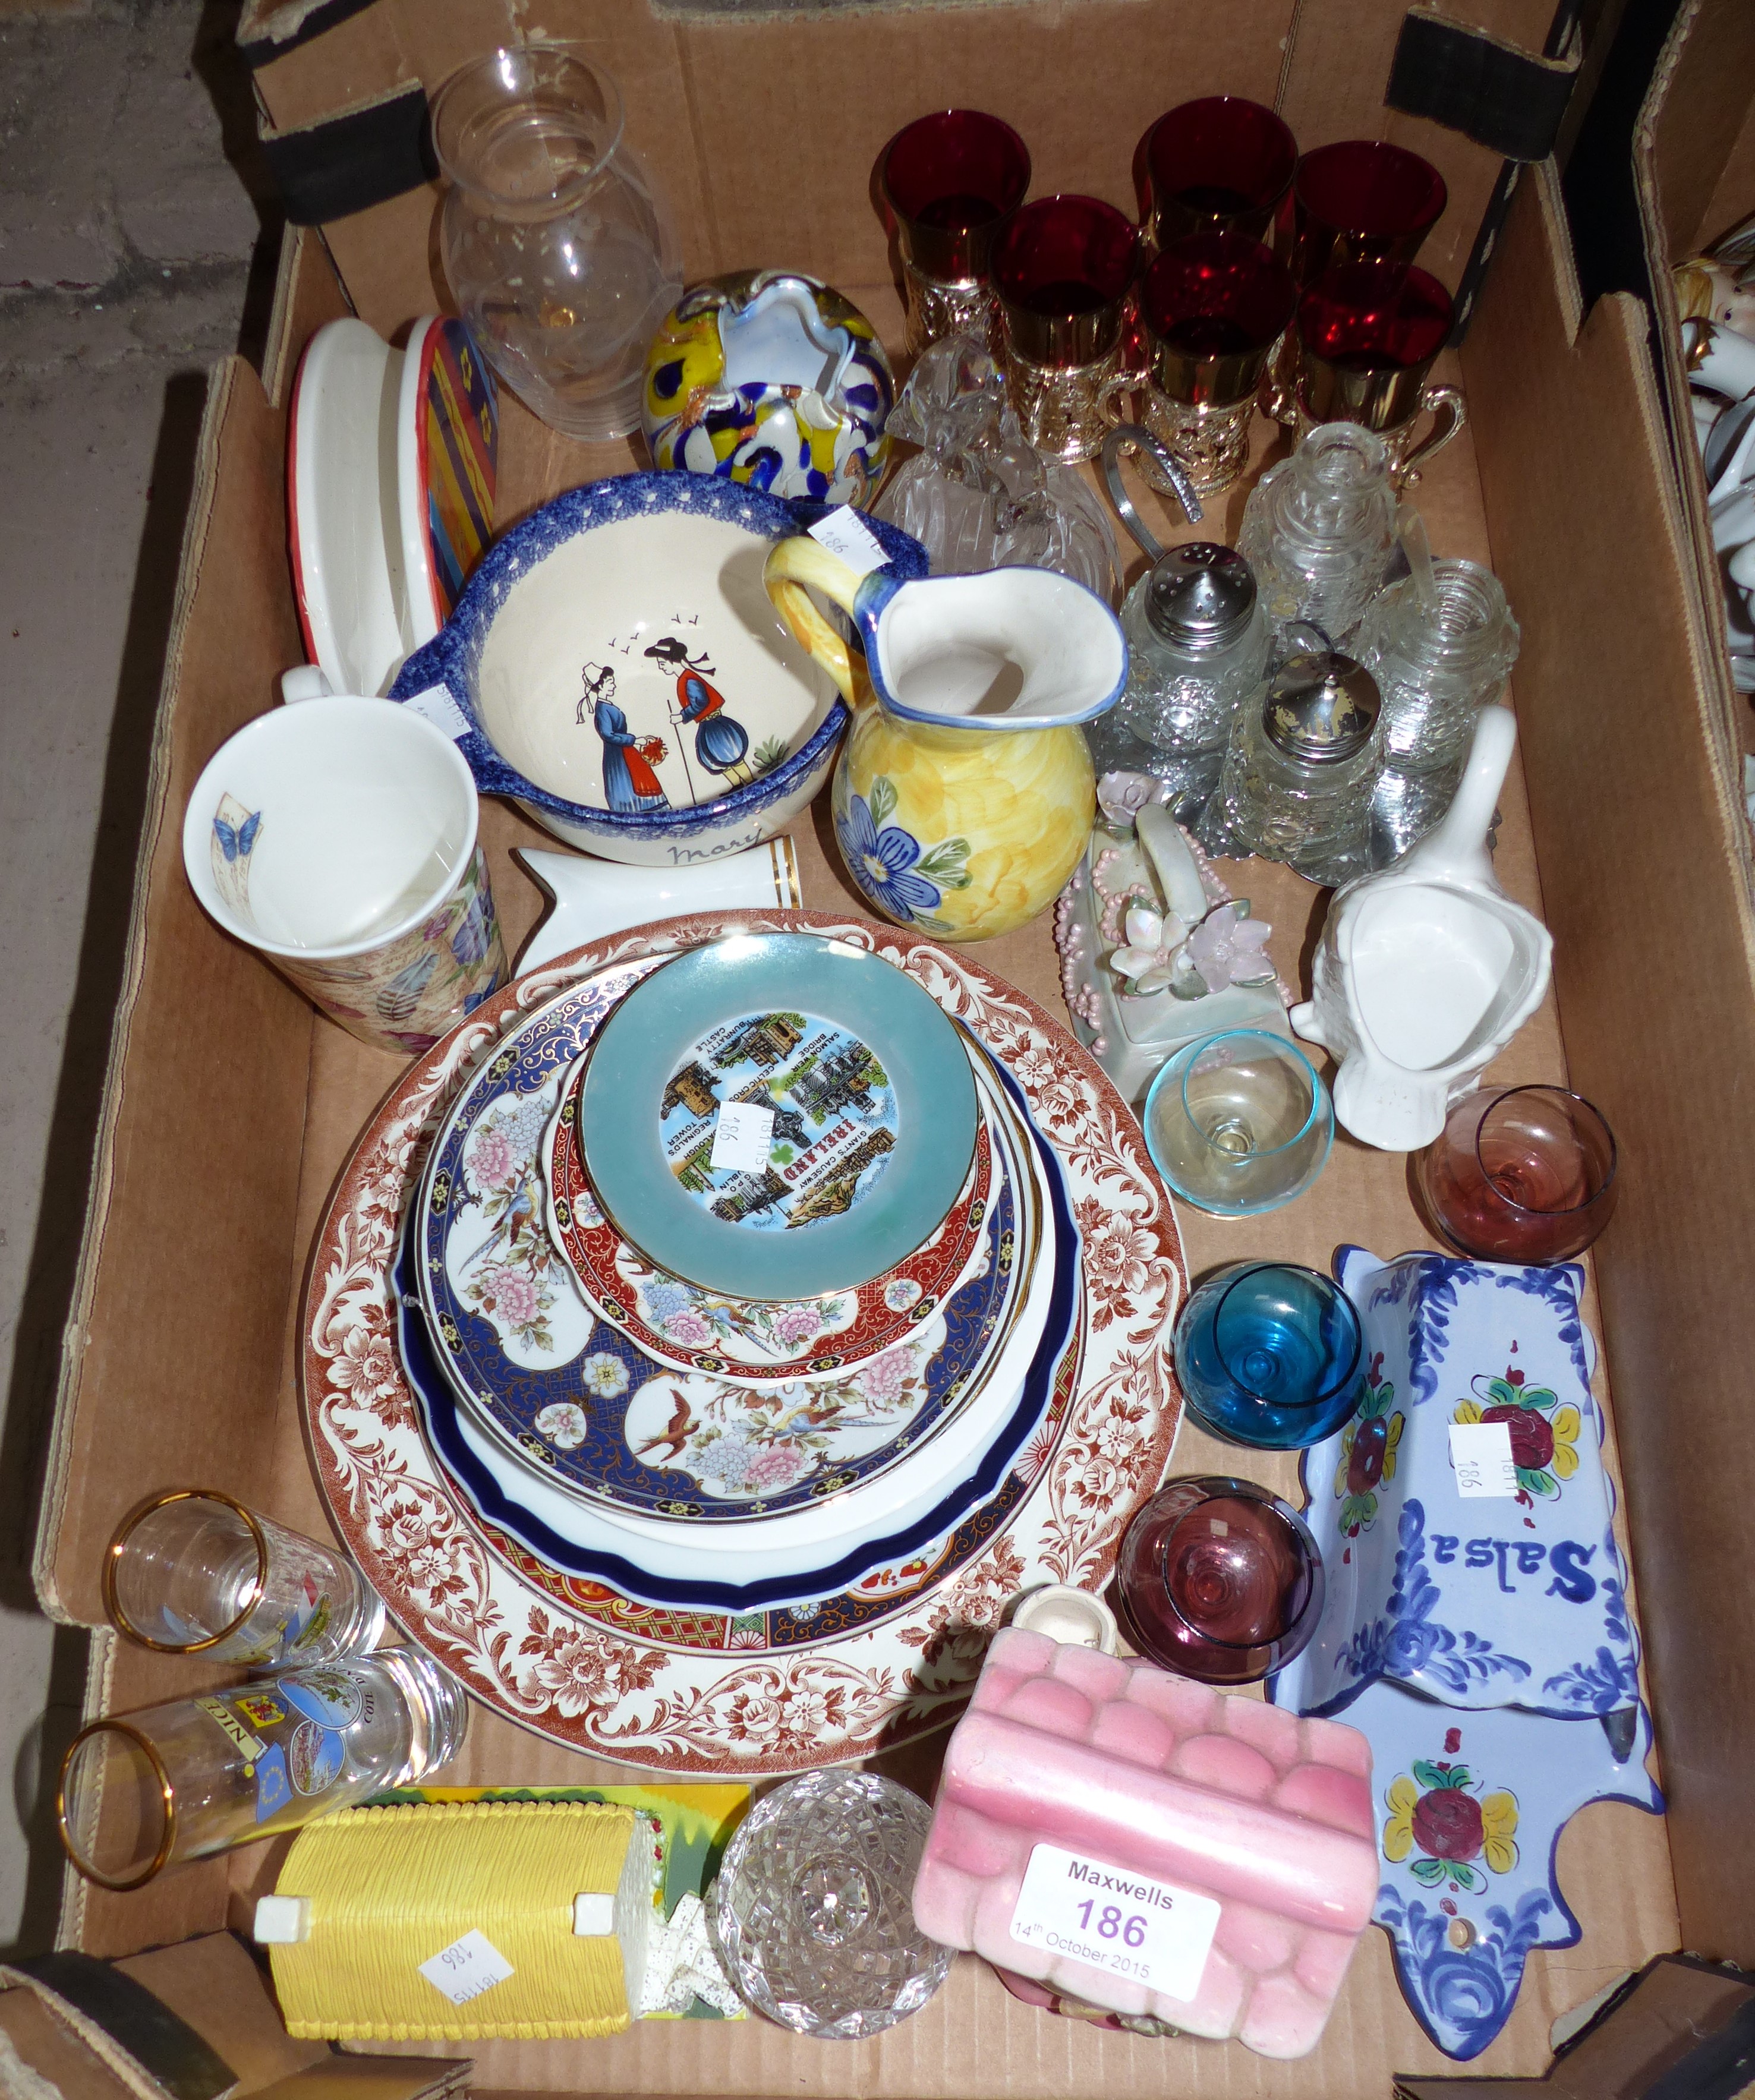 A selection of decorative china and glassware